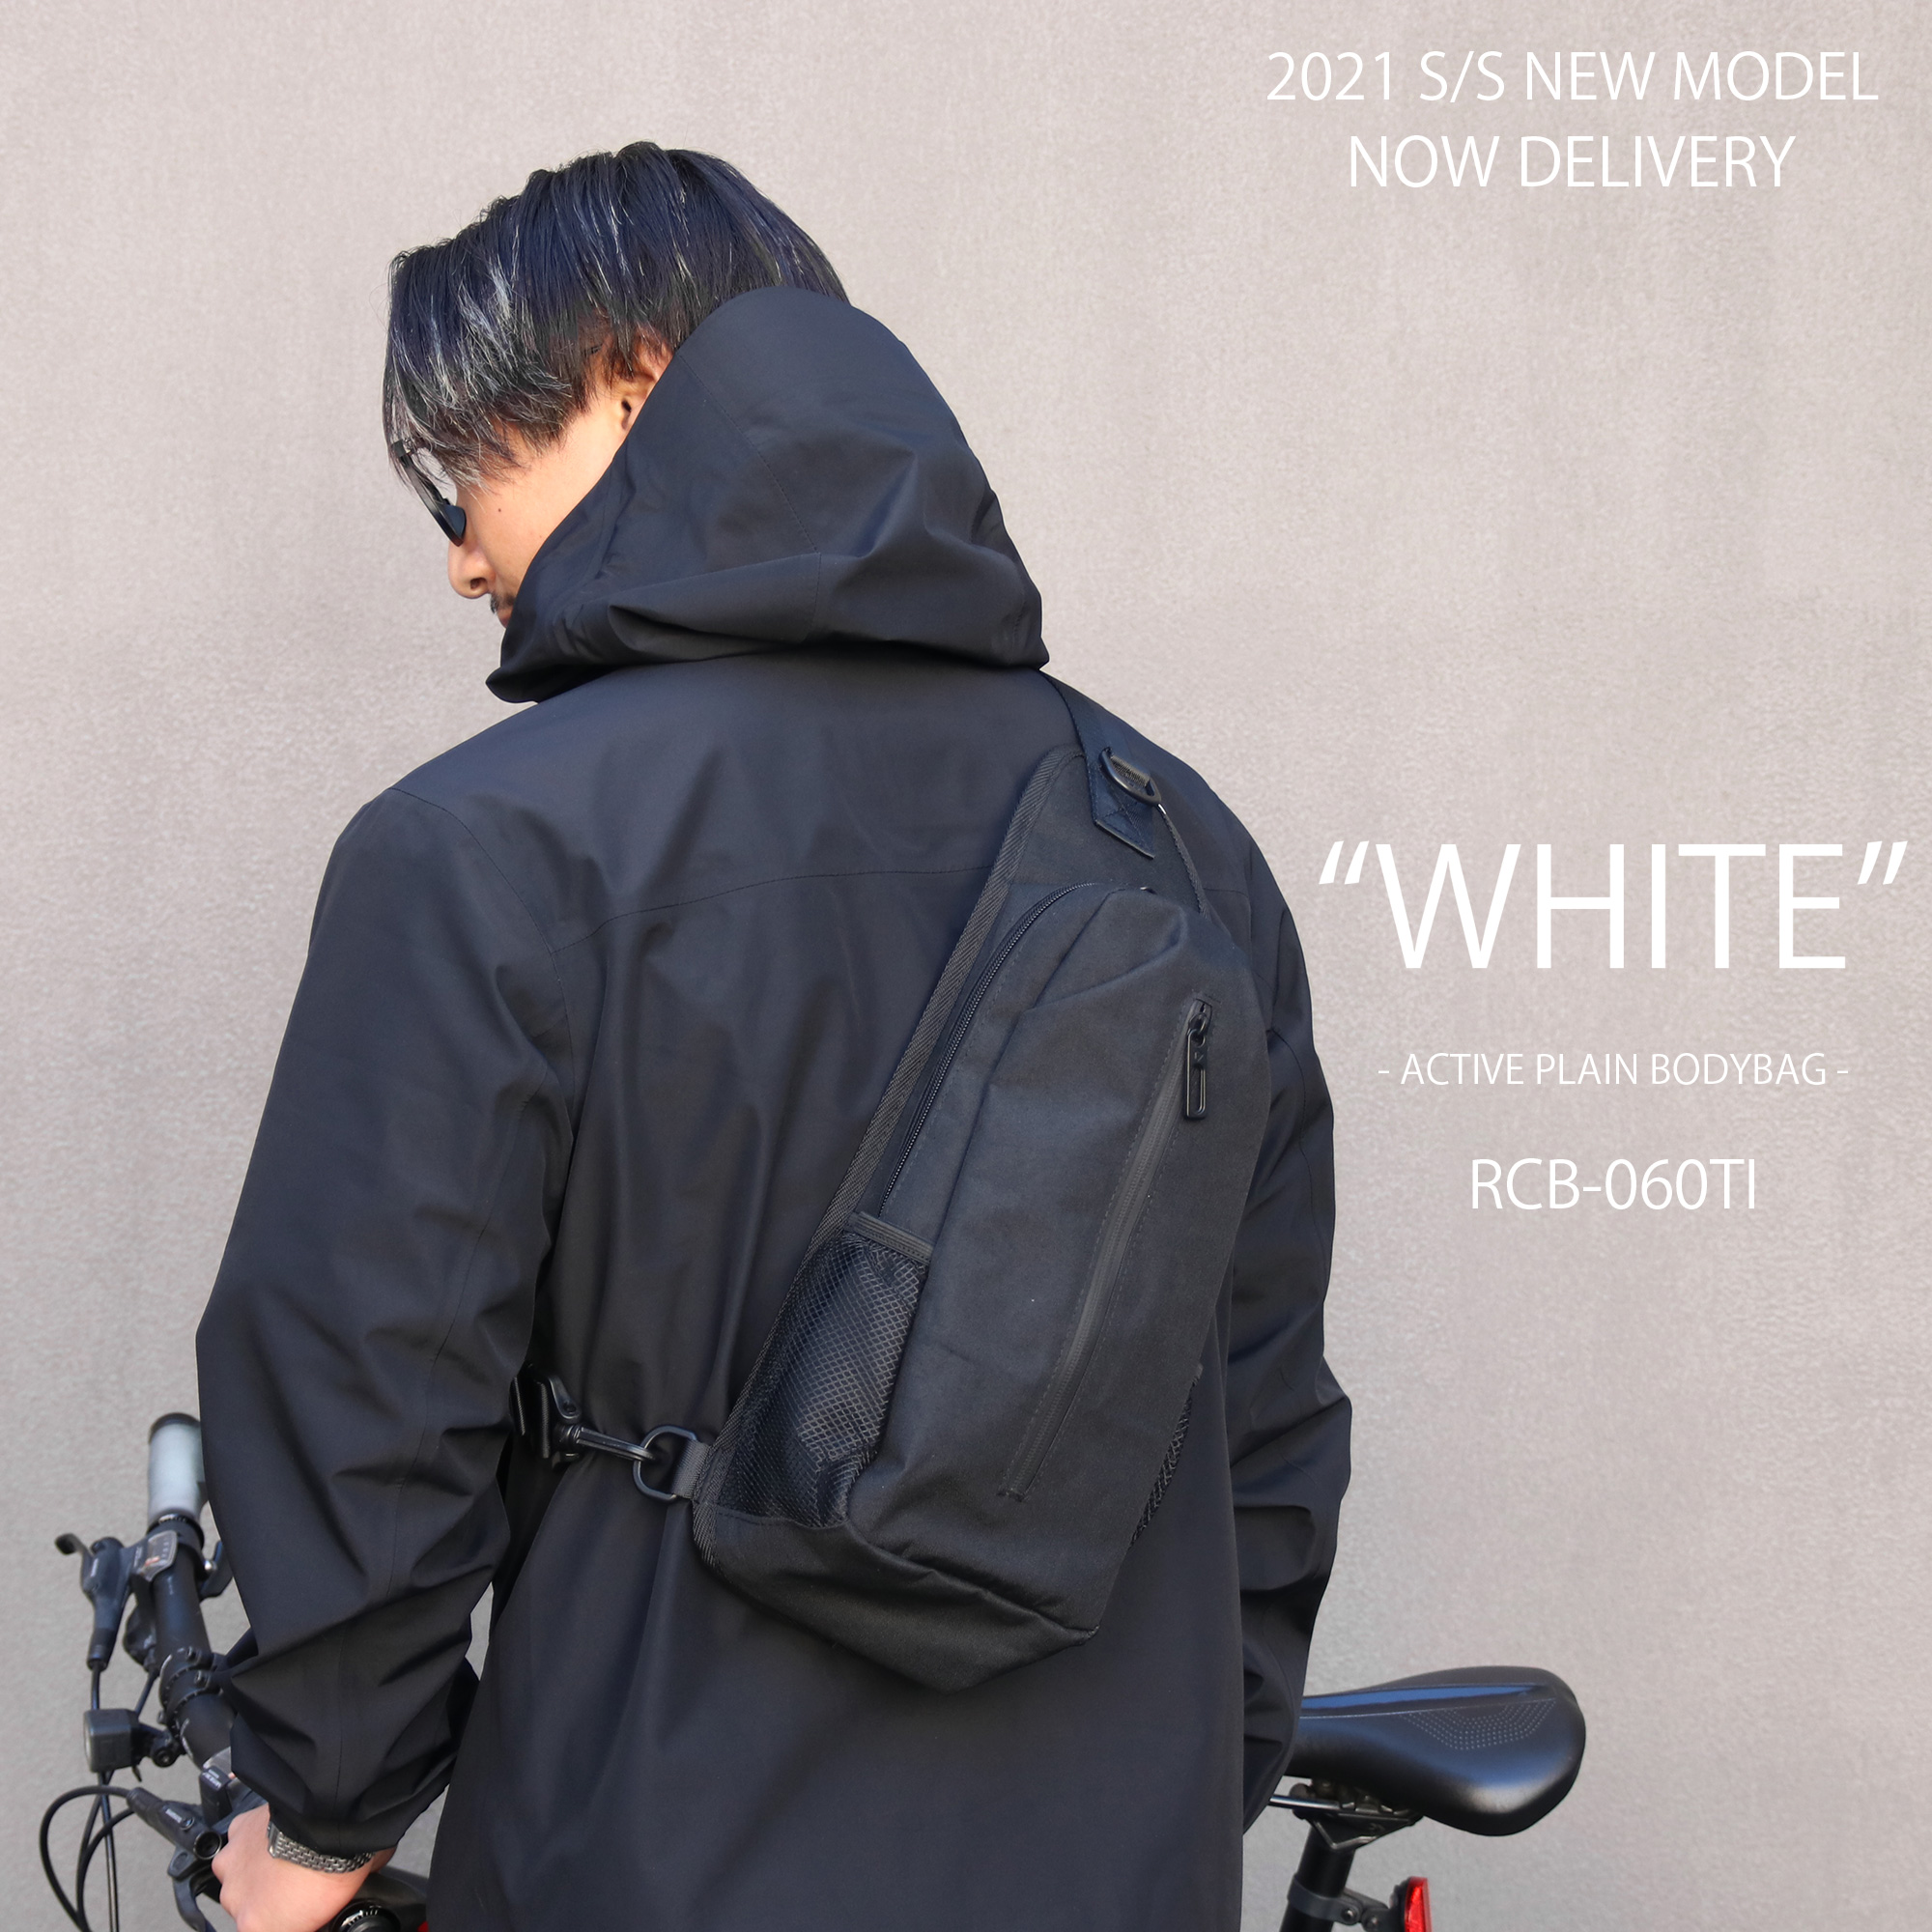 FUNCTIONAL 2021S/S SECOND DELIVERY "WHITE" 入荷しました！